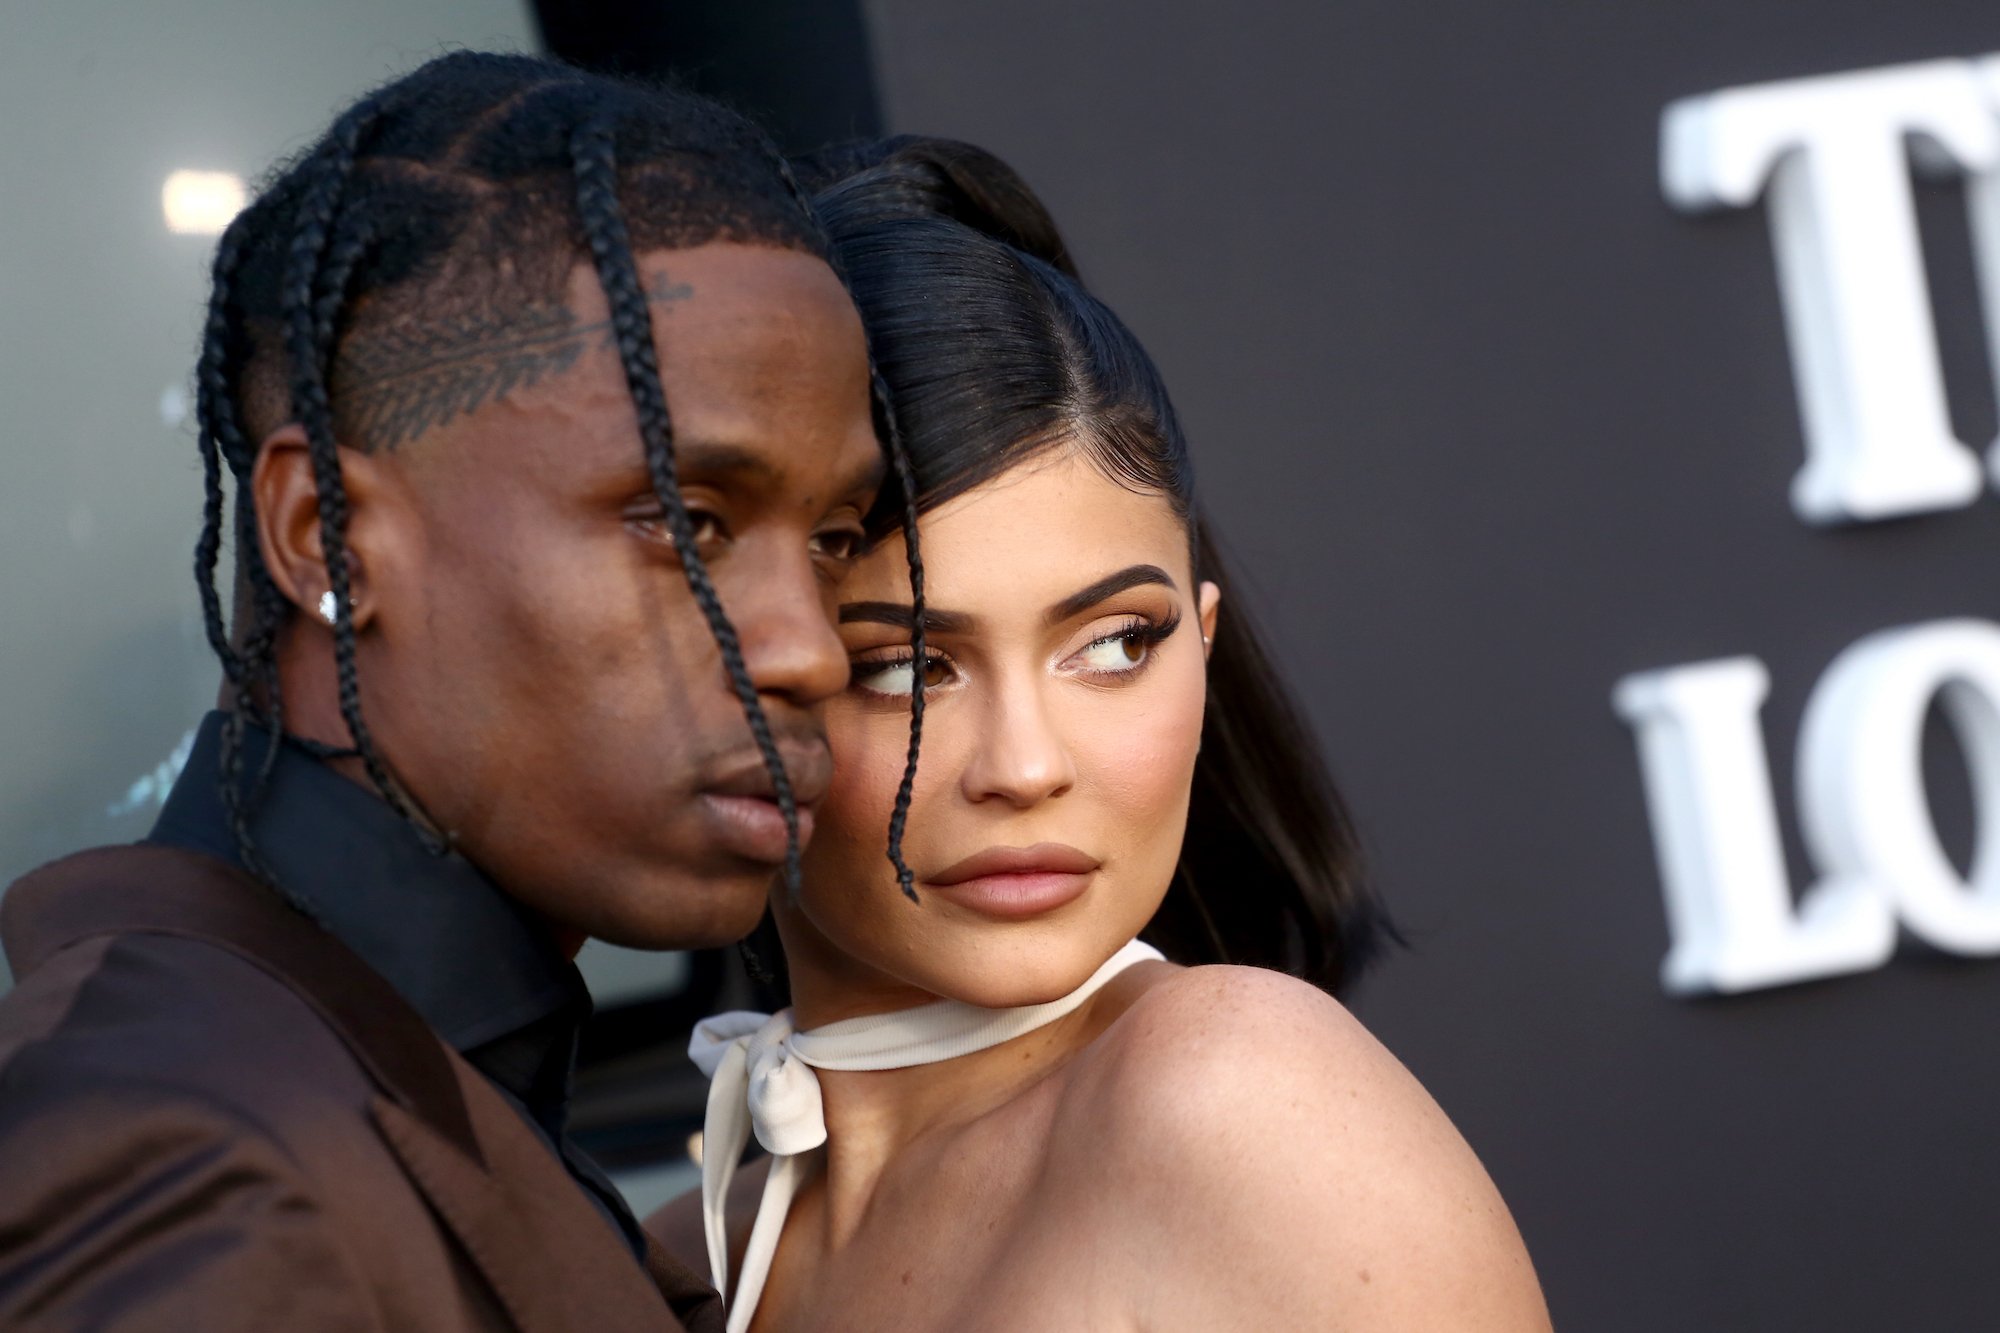 Kylie Jenner and Travis Scott Are 'Exploring Their Relationship